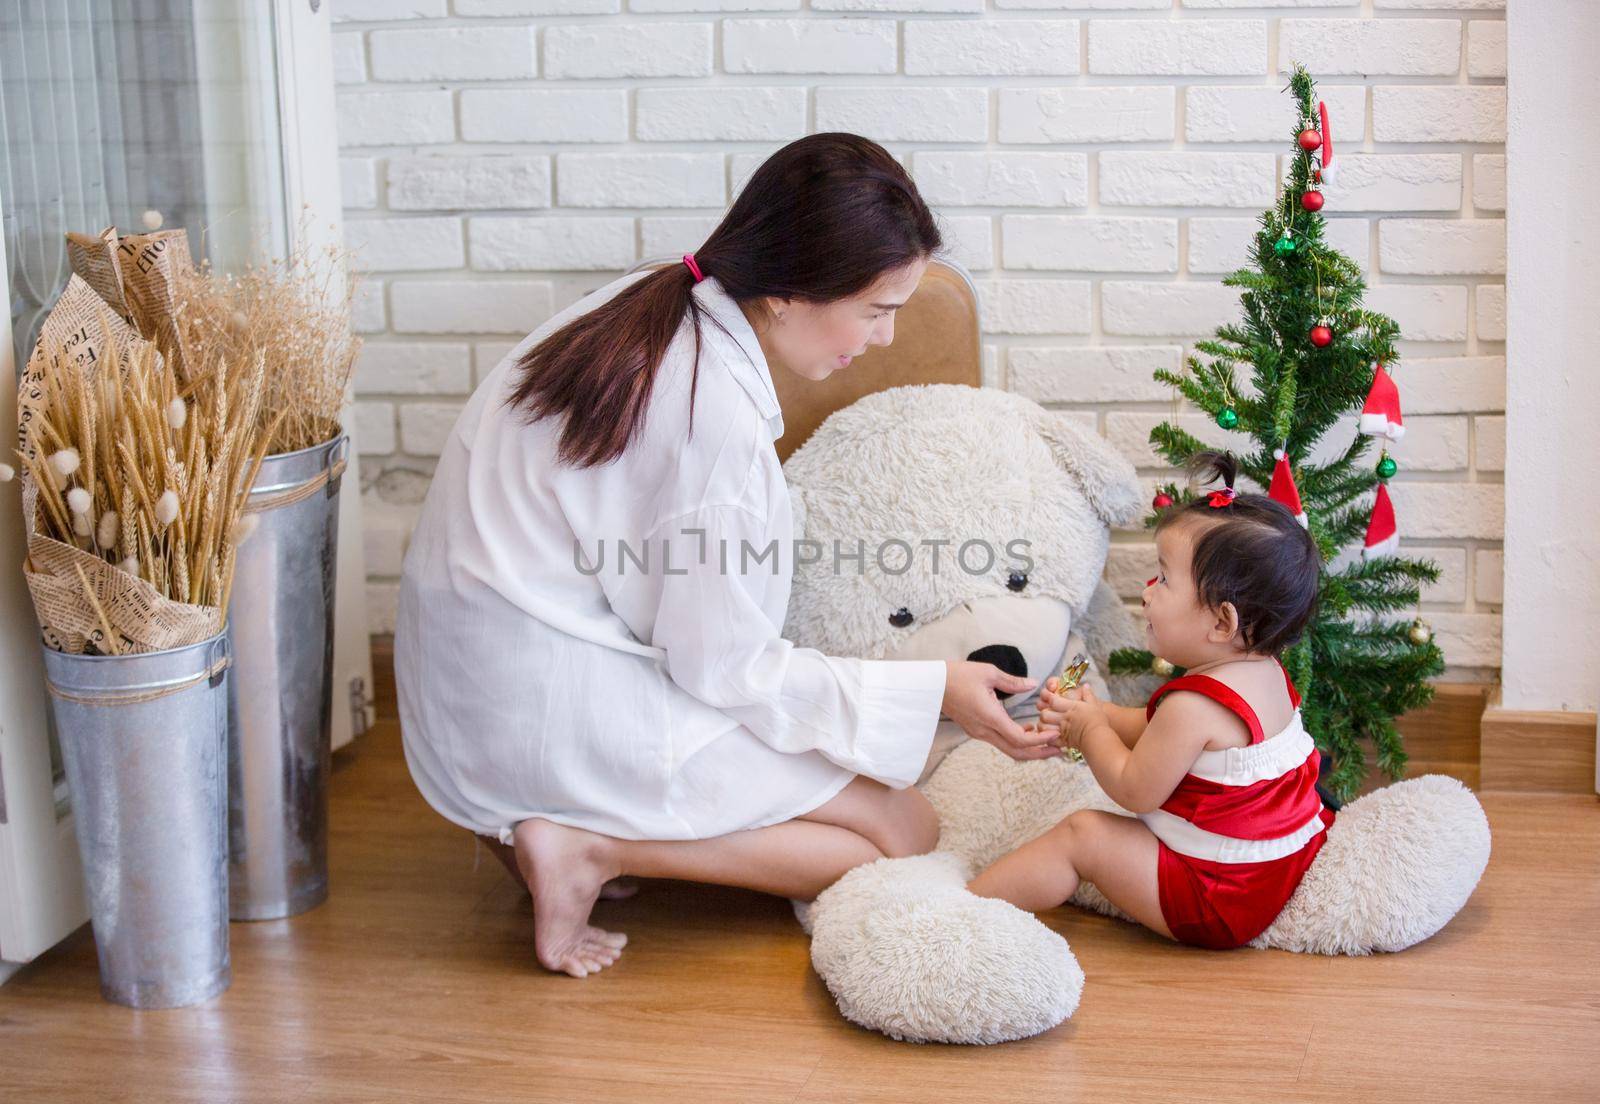 Full Length Of Cute Baby Girl Wearing Santa Costume While Sitting With Christmas Decorations by chuanchai